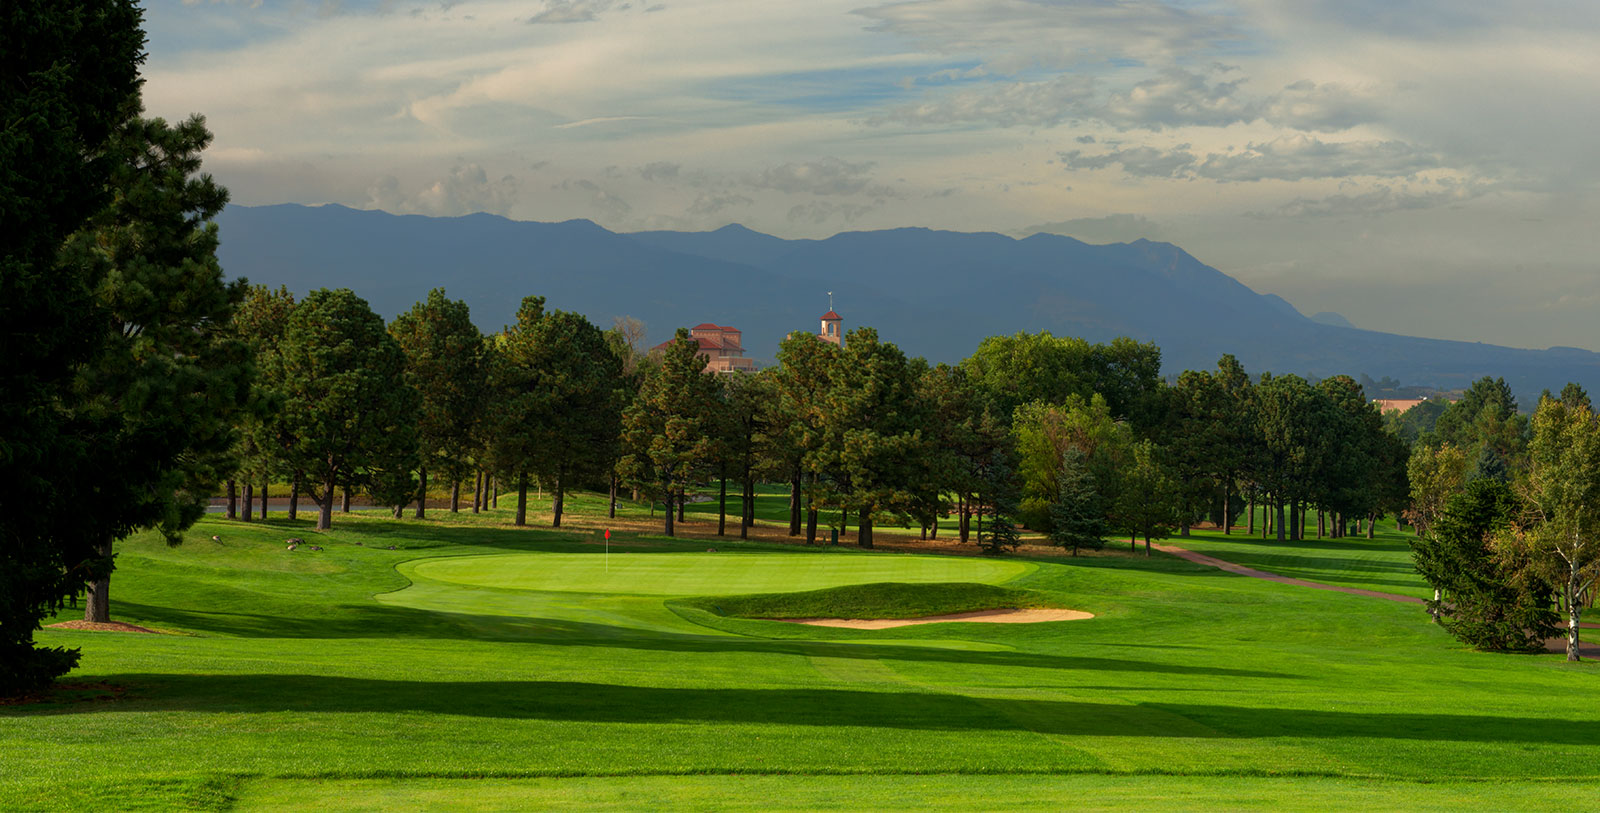 Image of East Couse, The Broadmoor, 1918, Member of Historic Hotels of America, in Colorado Springs, Colorado, Golf